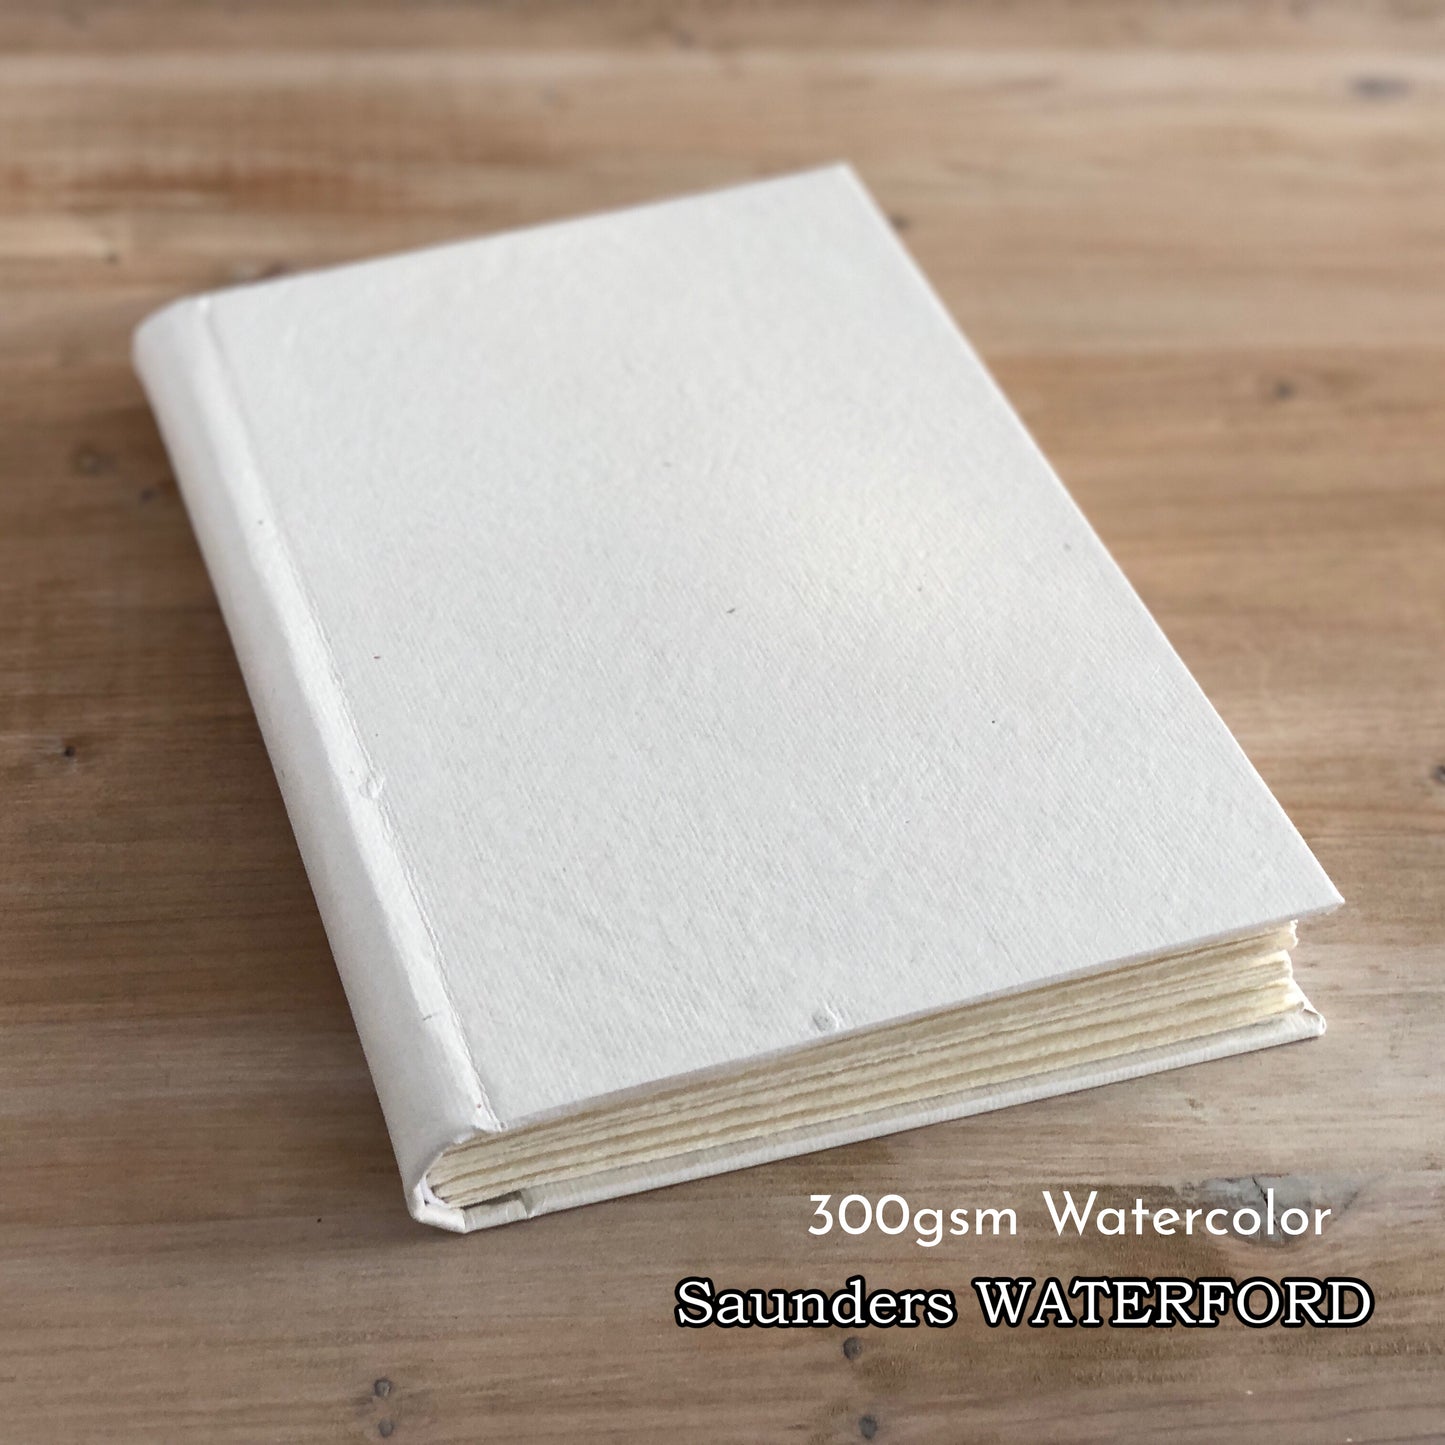 Large Watercolor Travel Journal with Saunders Waterford Cotton Paper a –